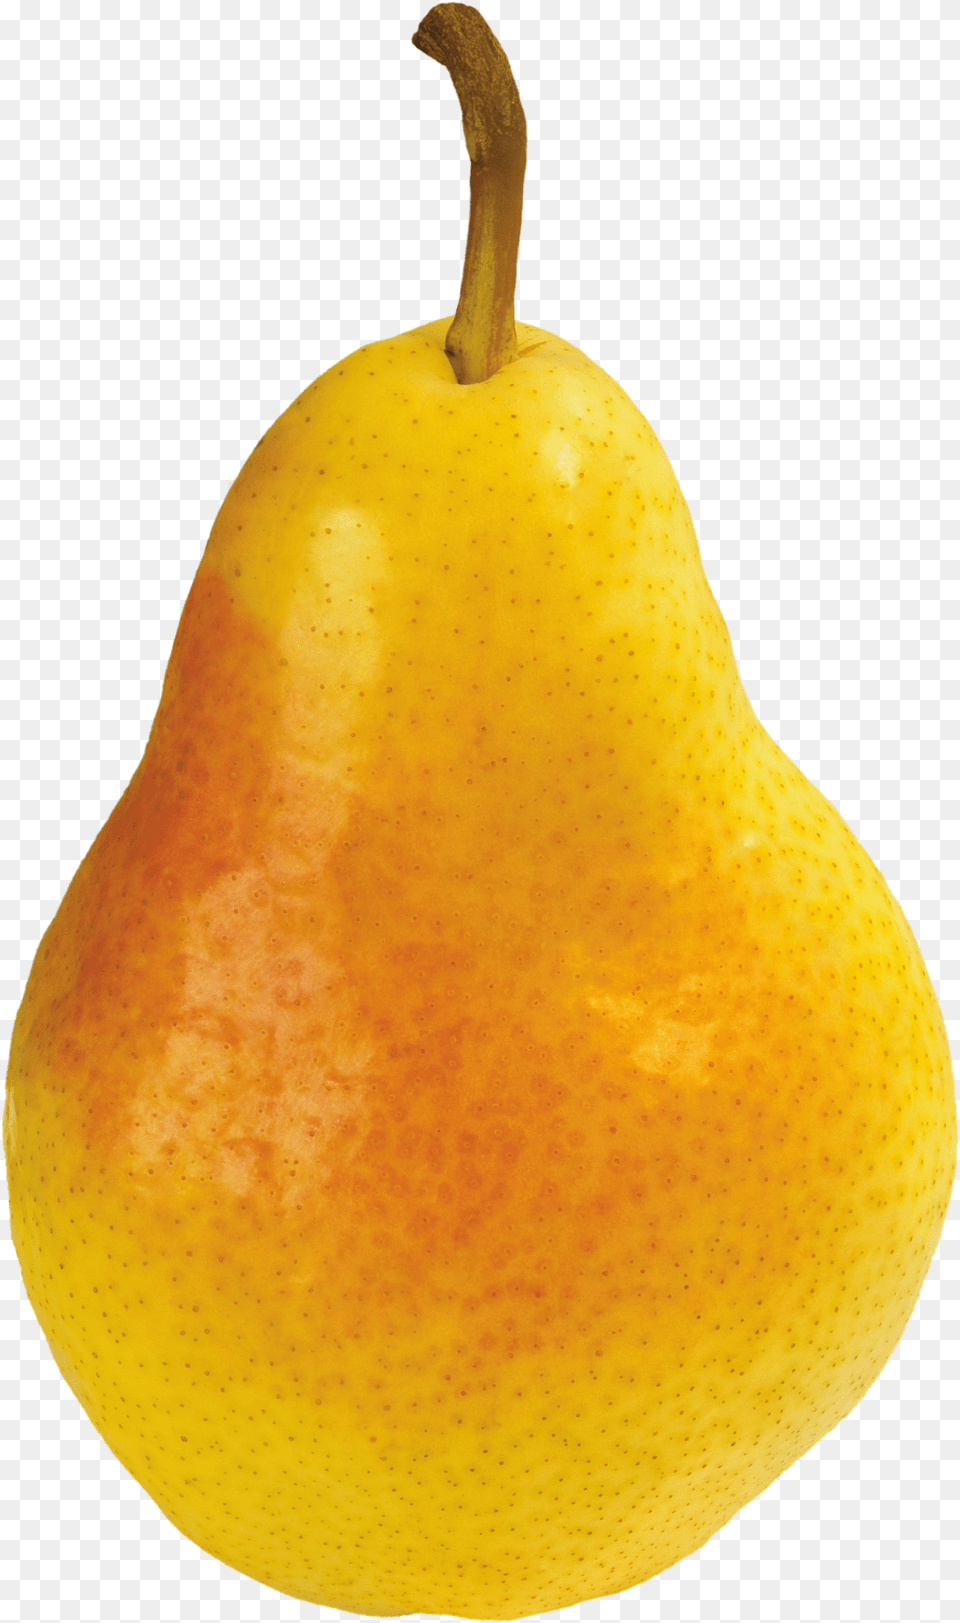 Pear Image, Food, Fruit, Plant, Produce Png